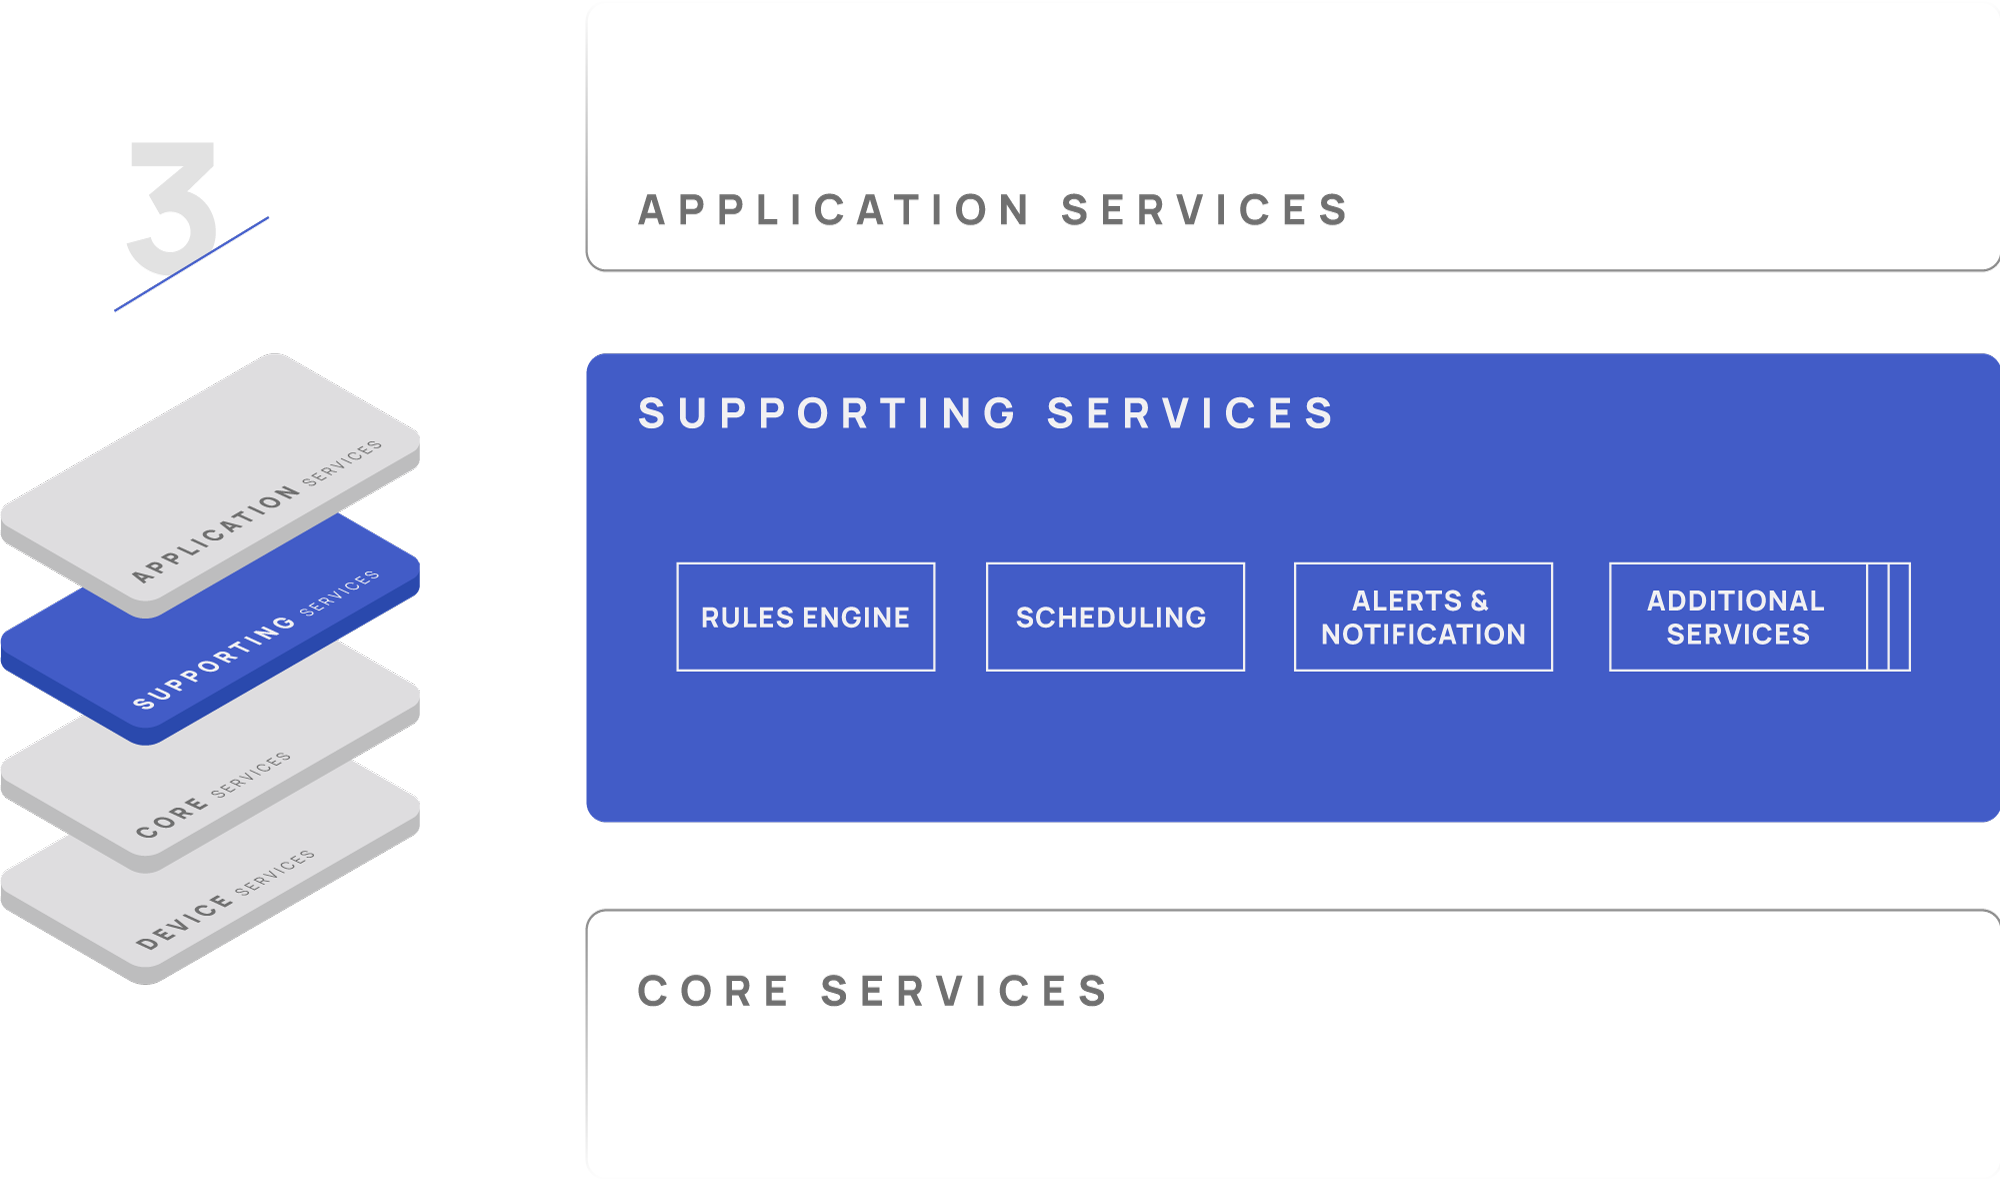 Supporting Services